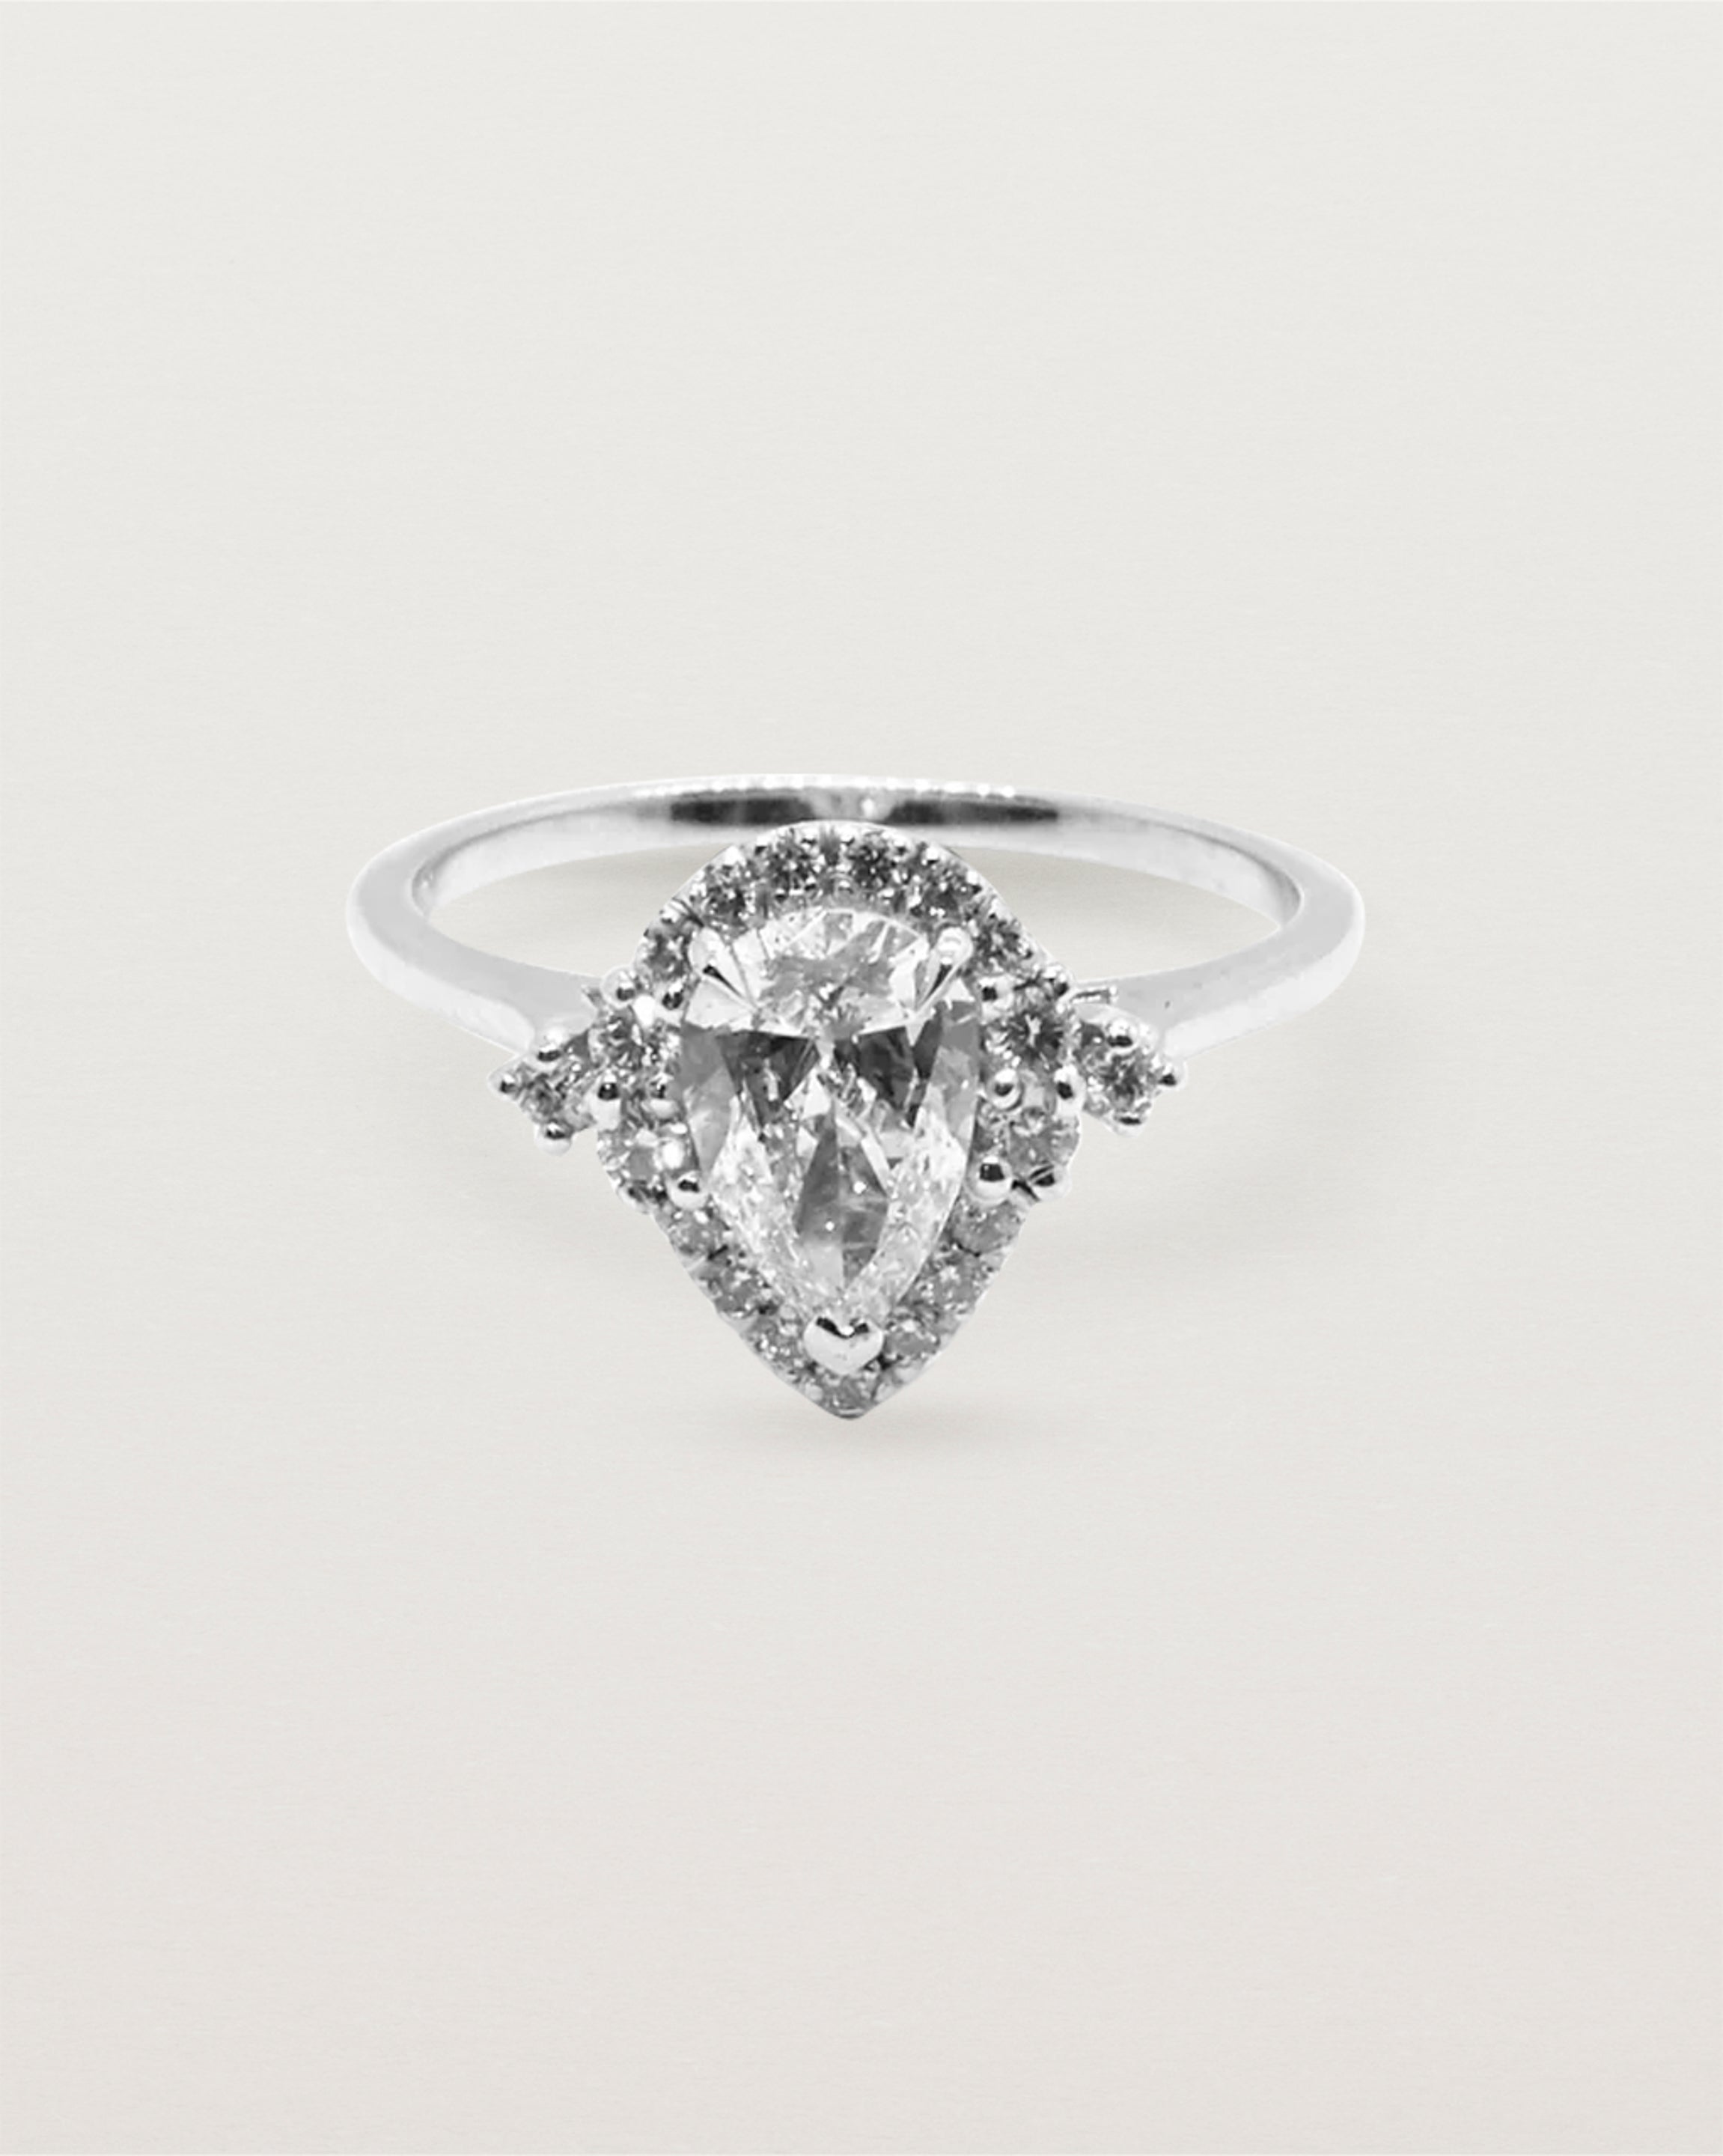 A pear cut diamond, framed by a halo of white diamonds crafted in white gold.